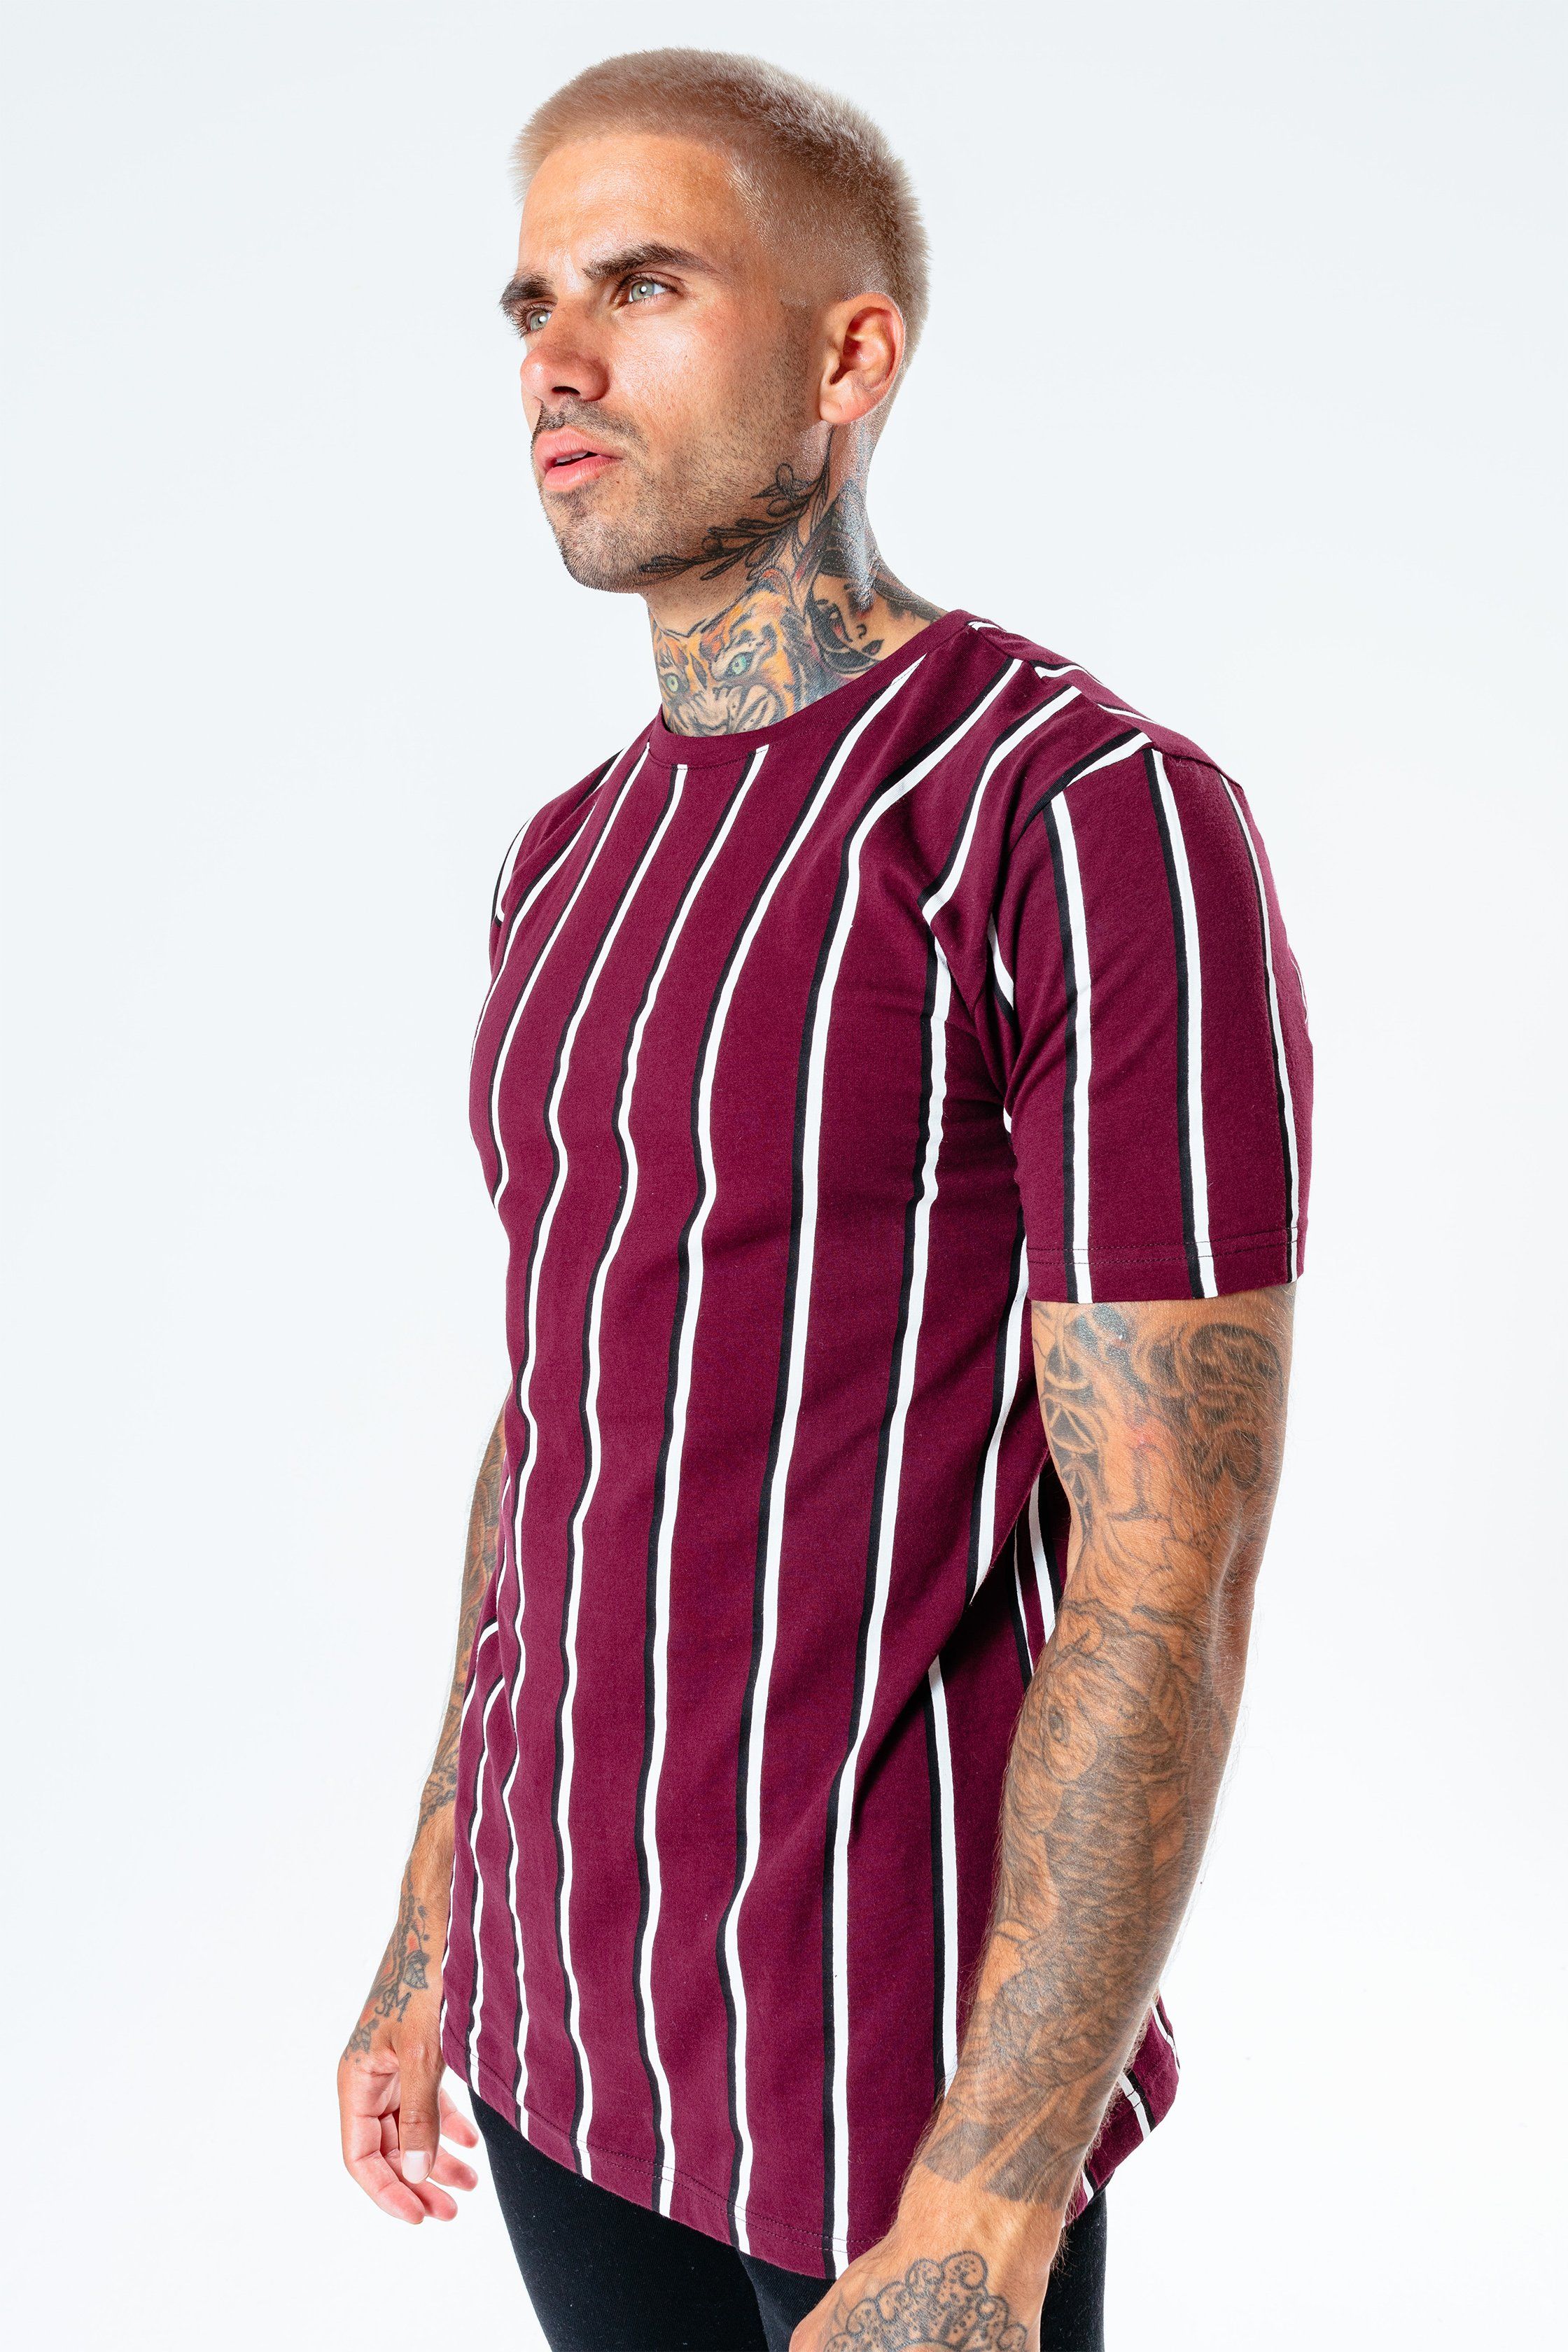 The HYPE. burgundy stripe men's t-shirt pairs perfectly with the HYPE. men's black joggers for an off-duty relaxed look. Coming in with a burgundy, white and black colour palette in an 100% cotton fabric base for supreme comfort. Designed in our standard men's tee shape, with a crew neckline and short sleeves. Finished with an embroidered embossed patch on the sleeve. Machine wash at 30 degrees.